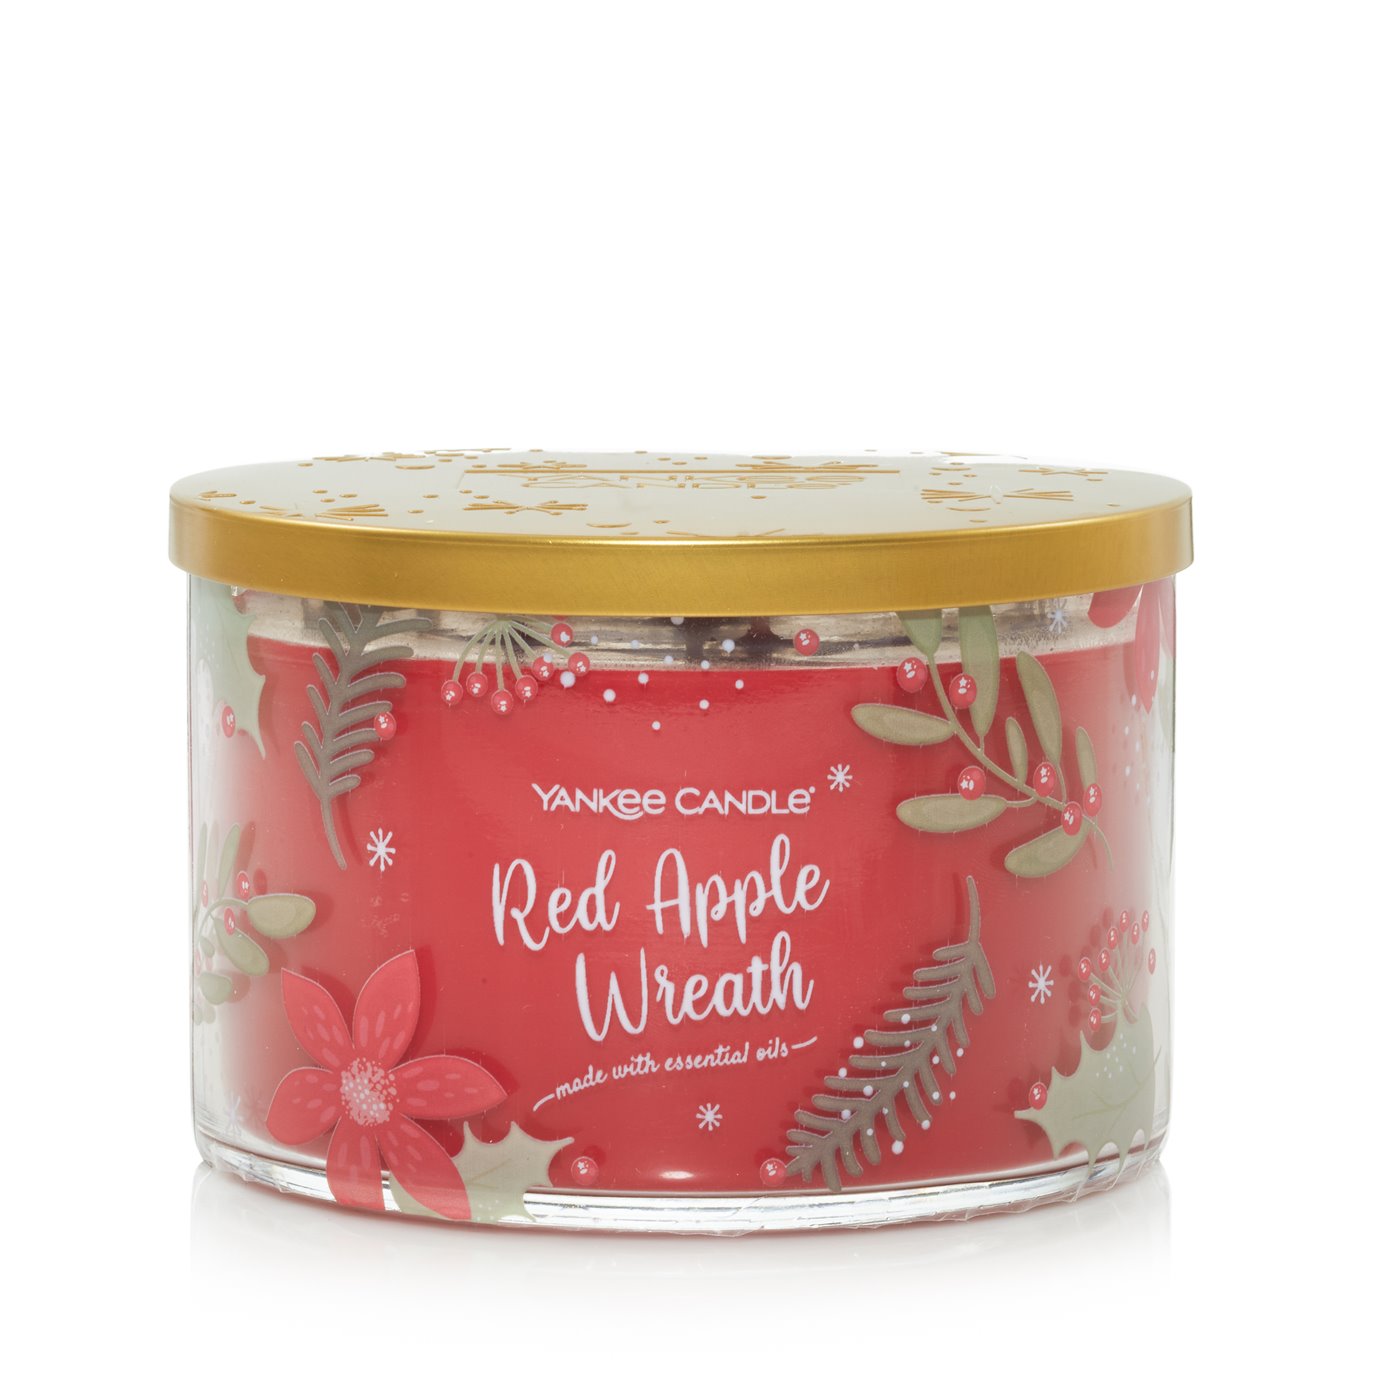 Yankee Candle Red Apple Wreath Limited Edition 3-Wick Holiday Tumbler Candle